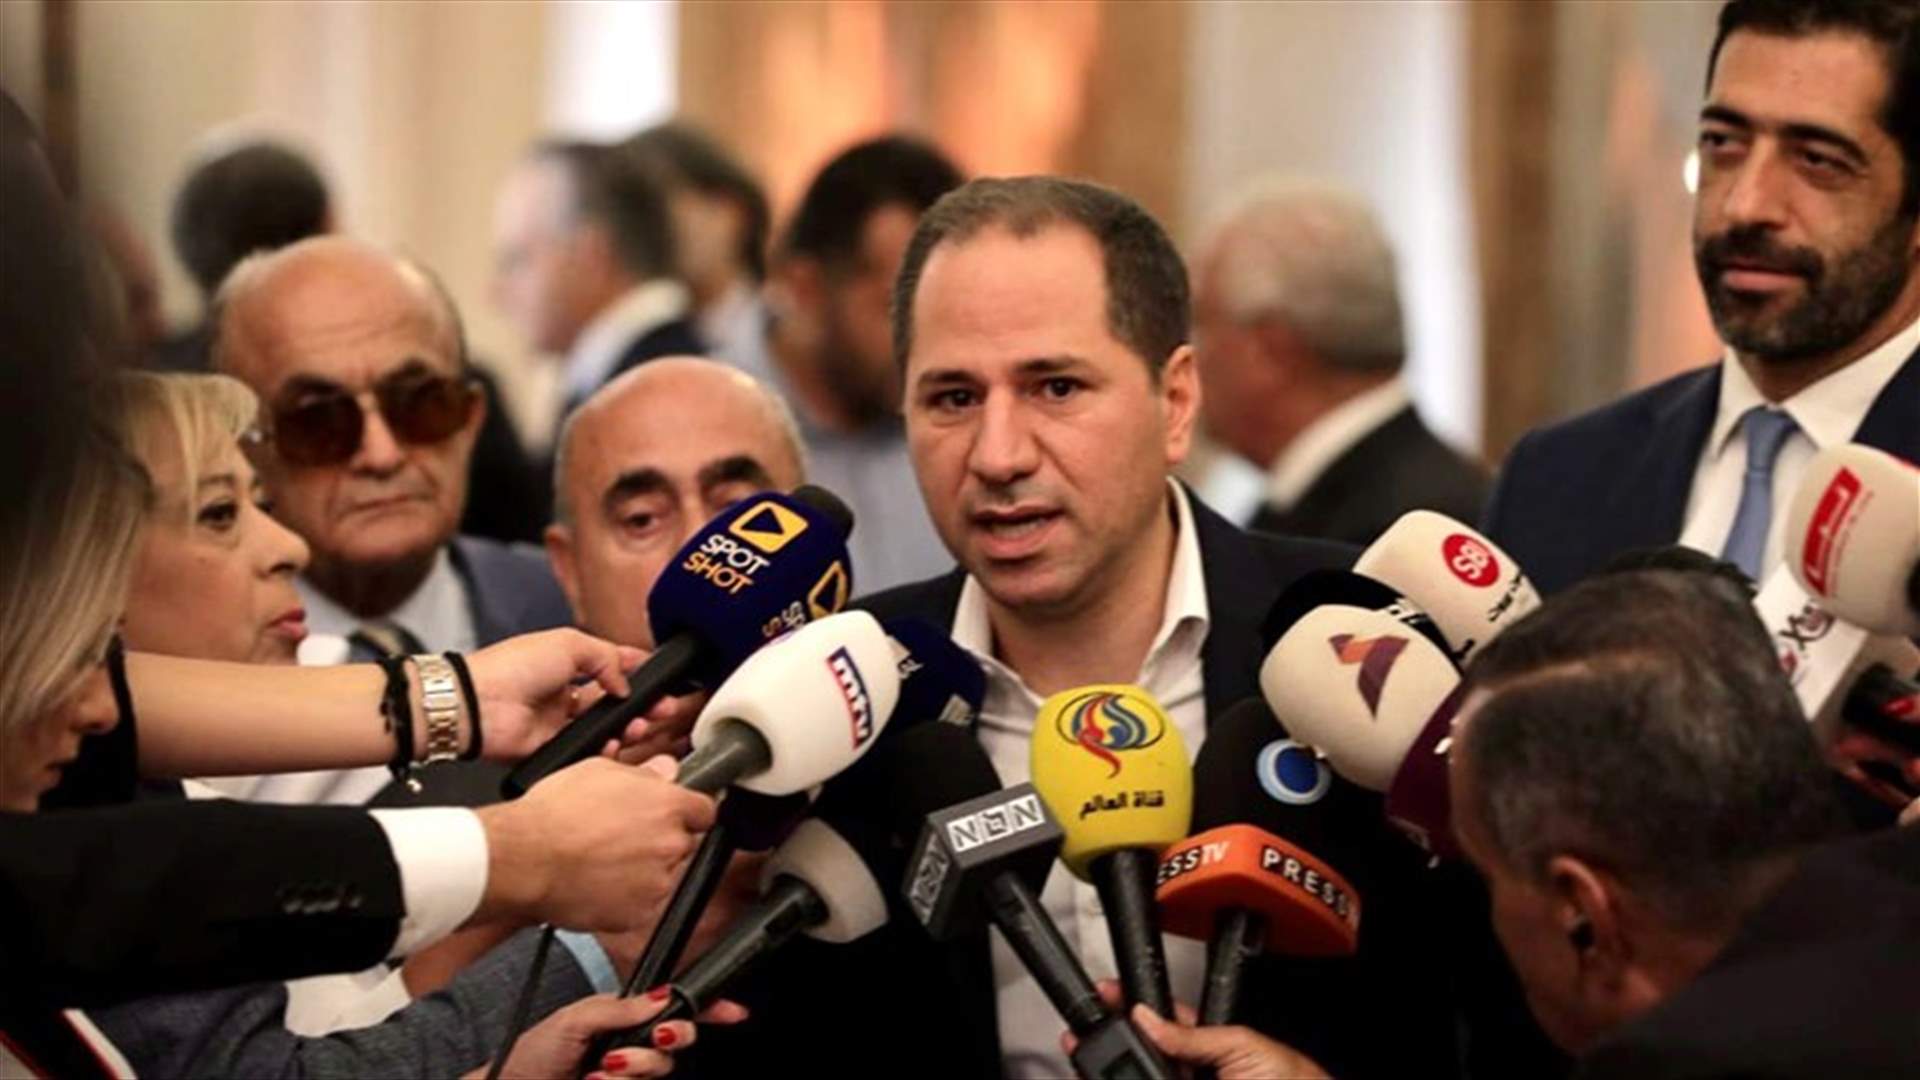 Kataeb Party leader Gemayel: We have the opportunity to unite our ranks